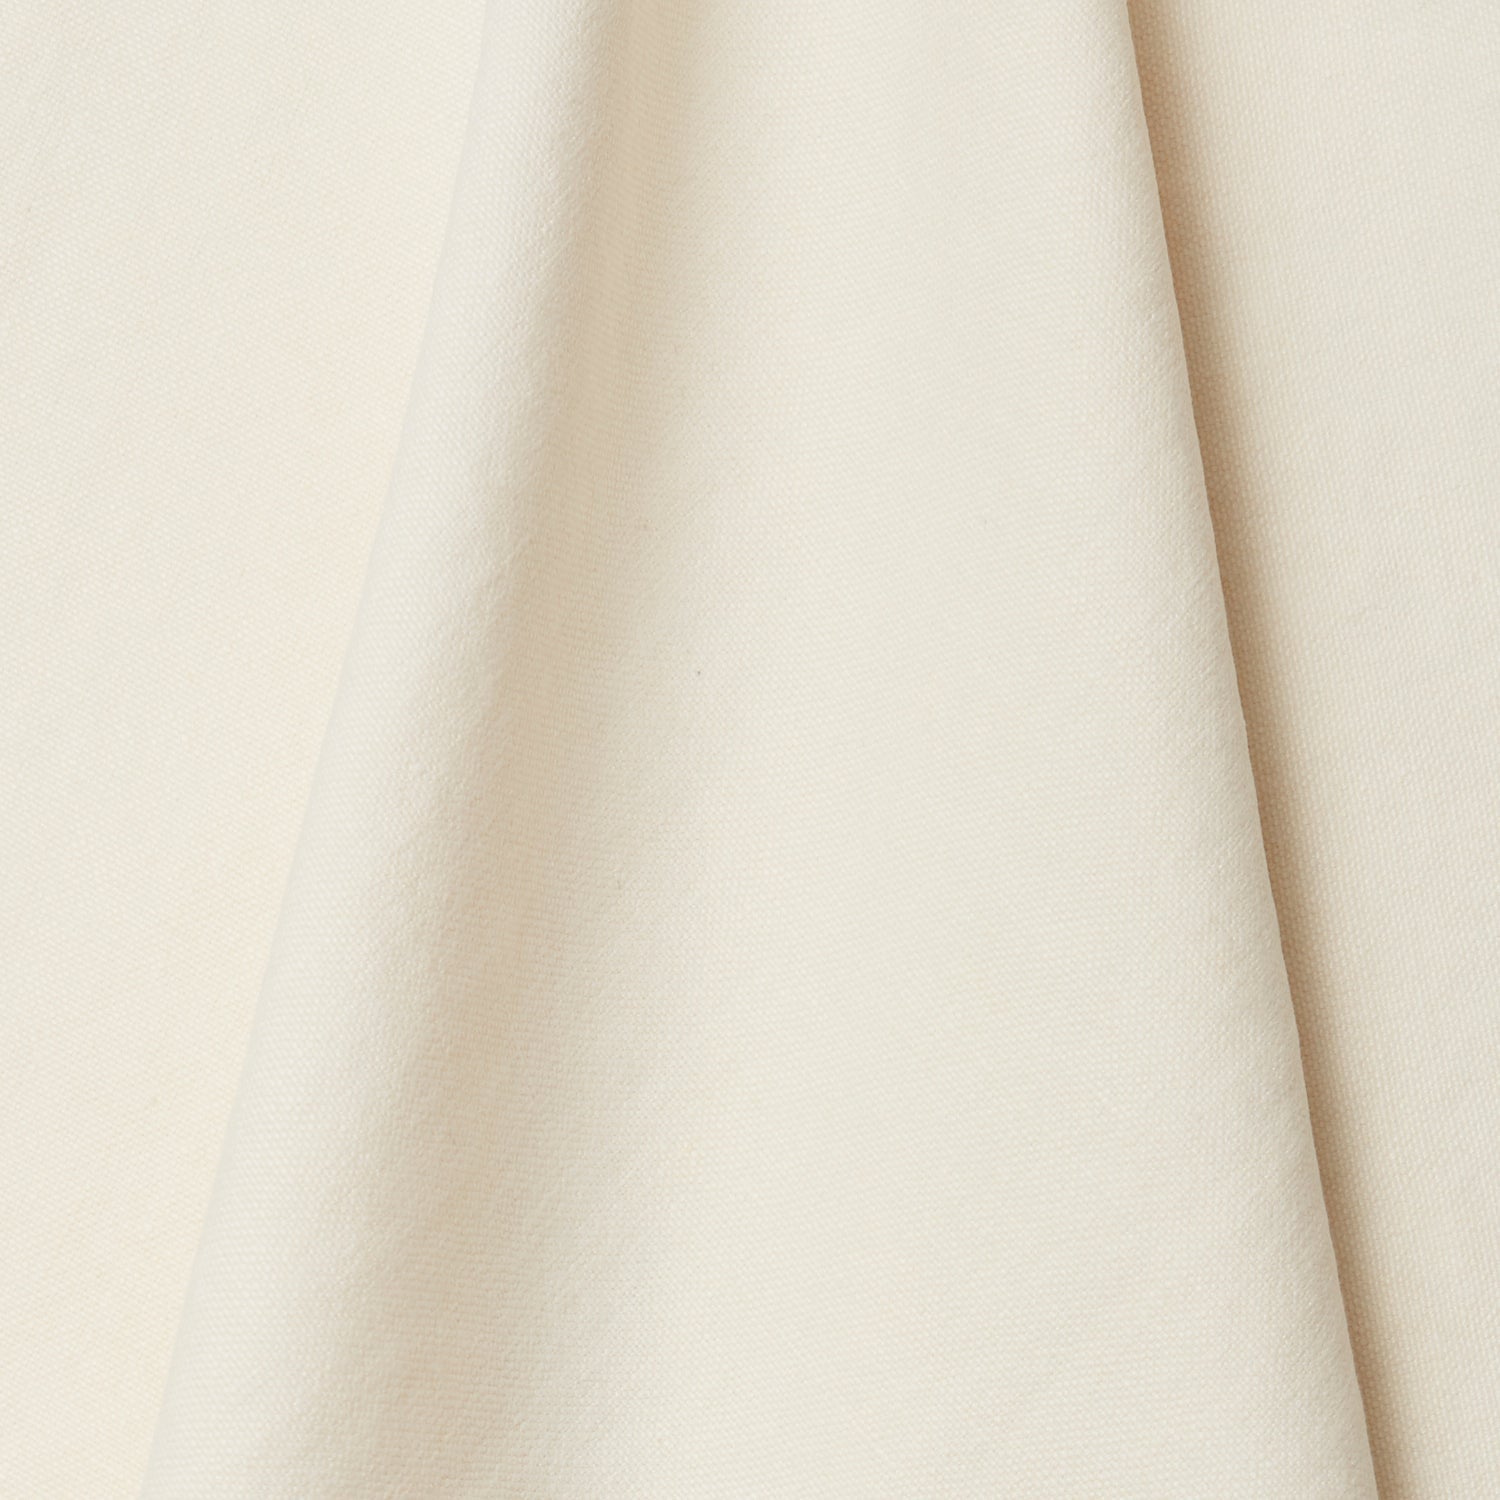 A draped swatch of linen fabric in a solid cream color.